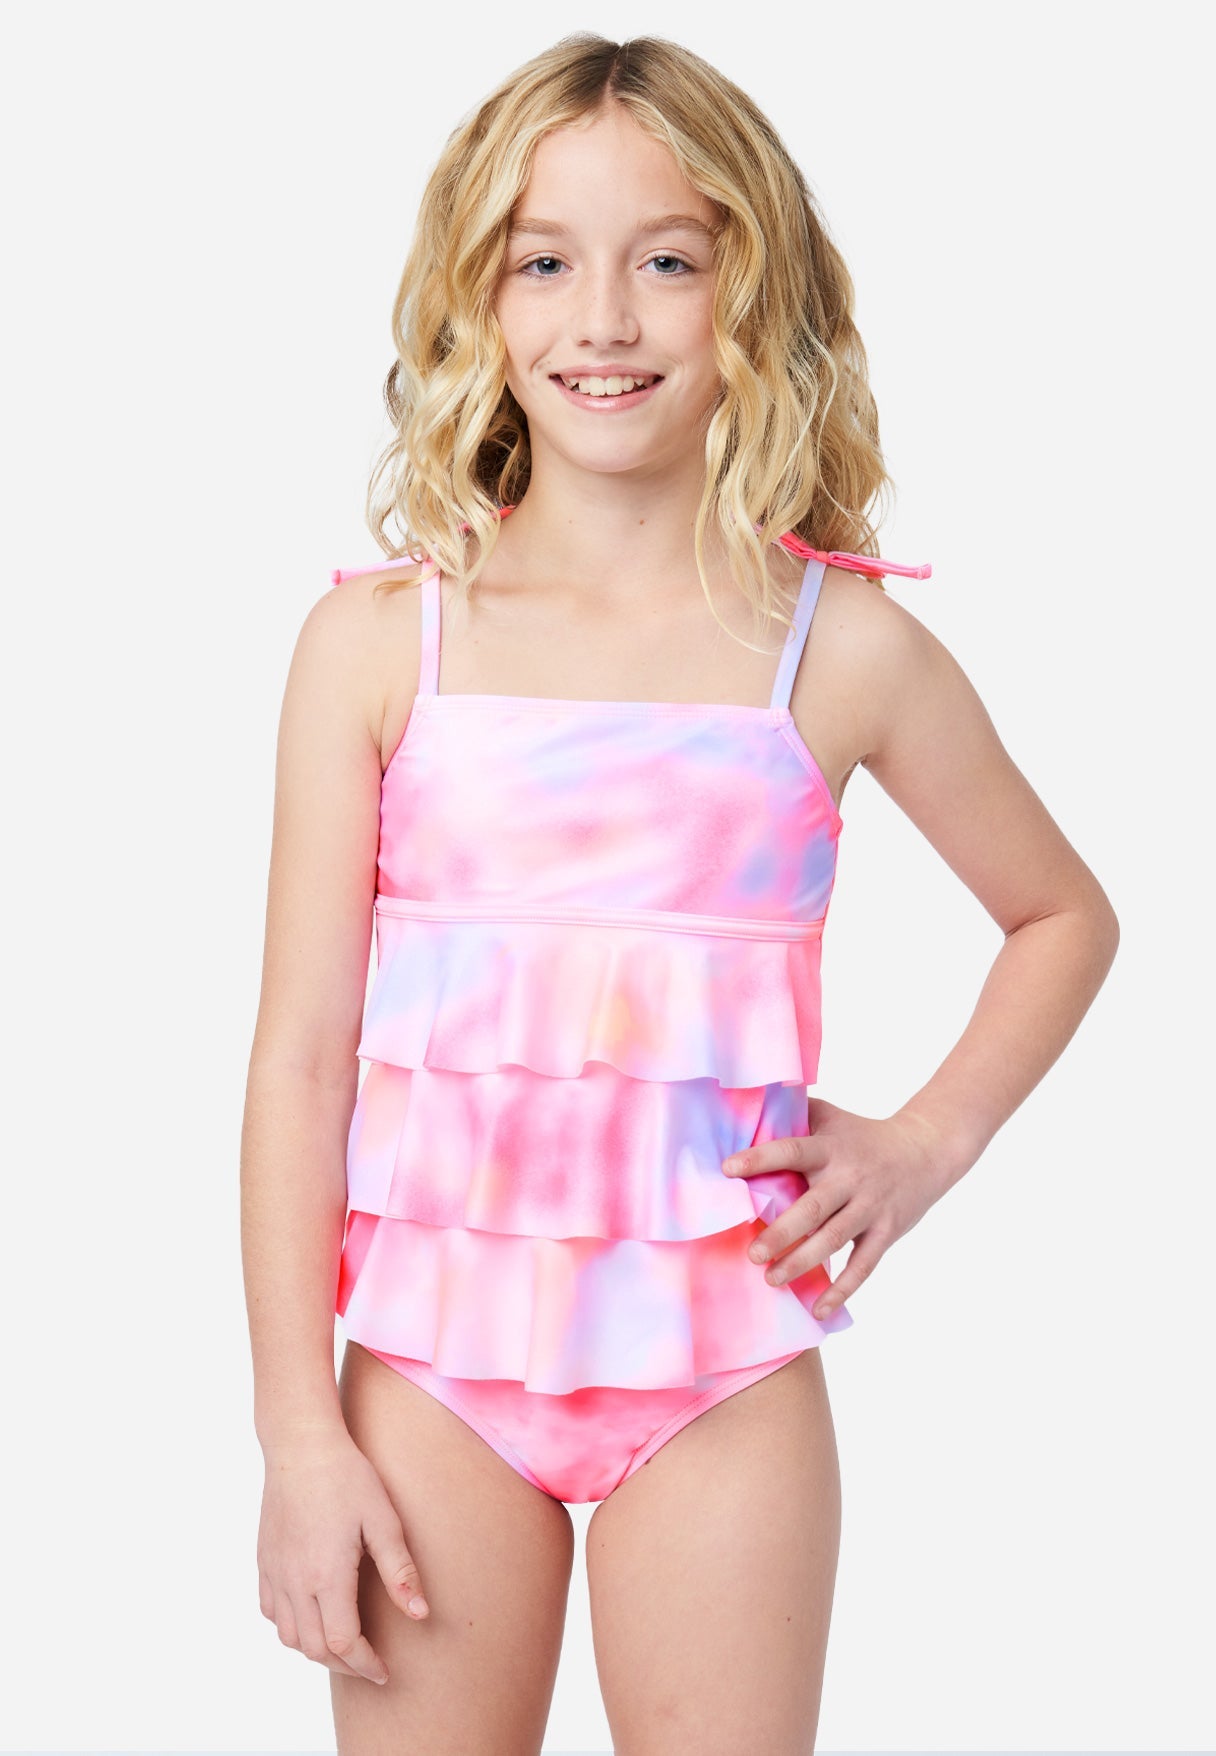 Tie Dye Print Girls Swimsuits Set For Toddler Baby Girls With